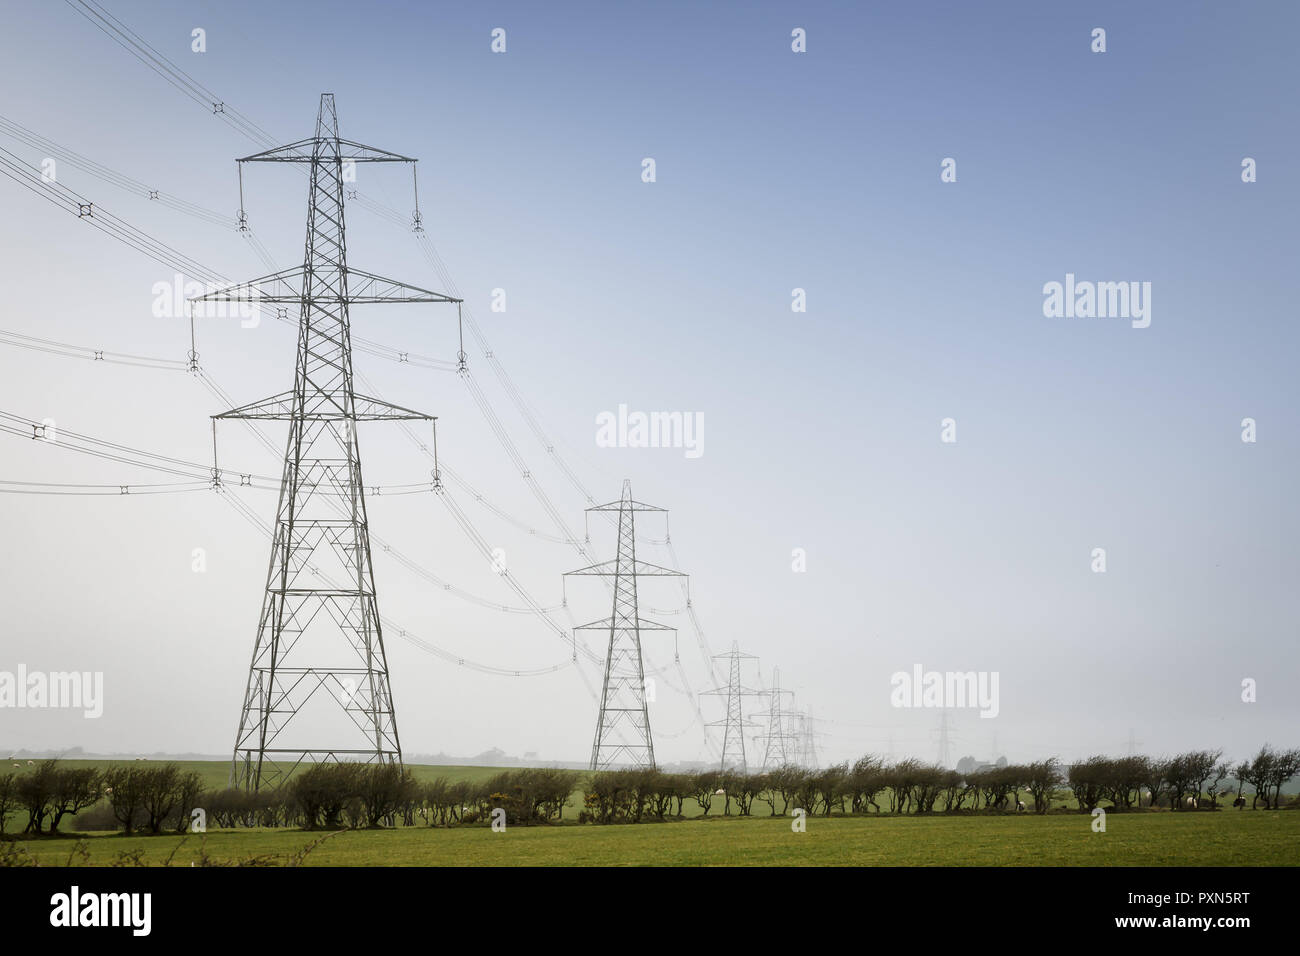 A line of electricity pylons in UK countryside. With blue sky and copy space Stock Photo